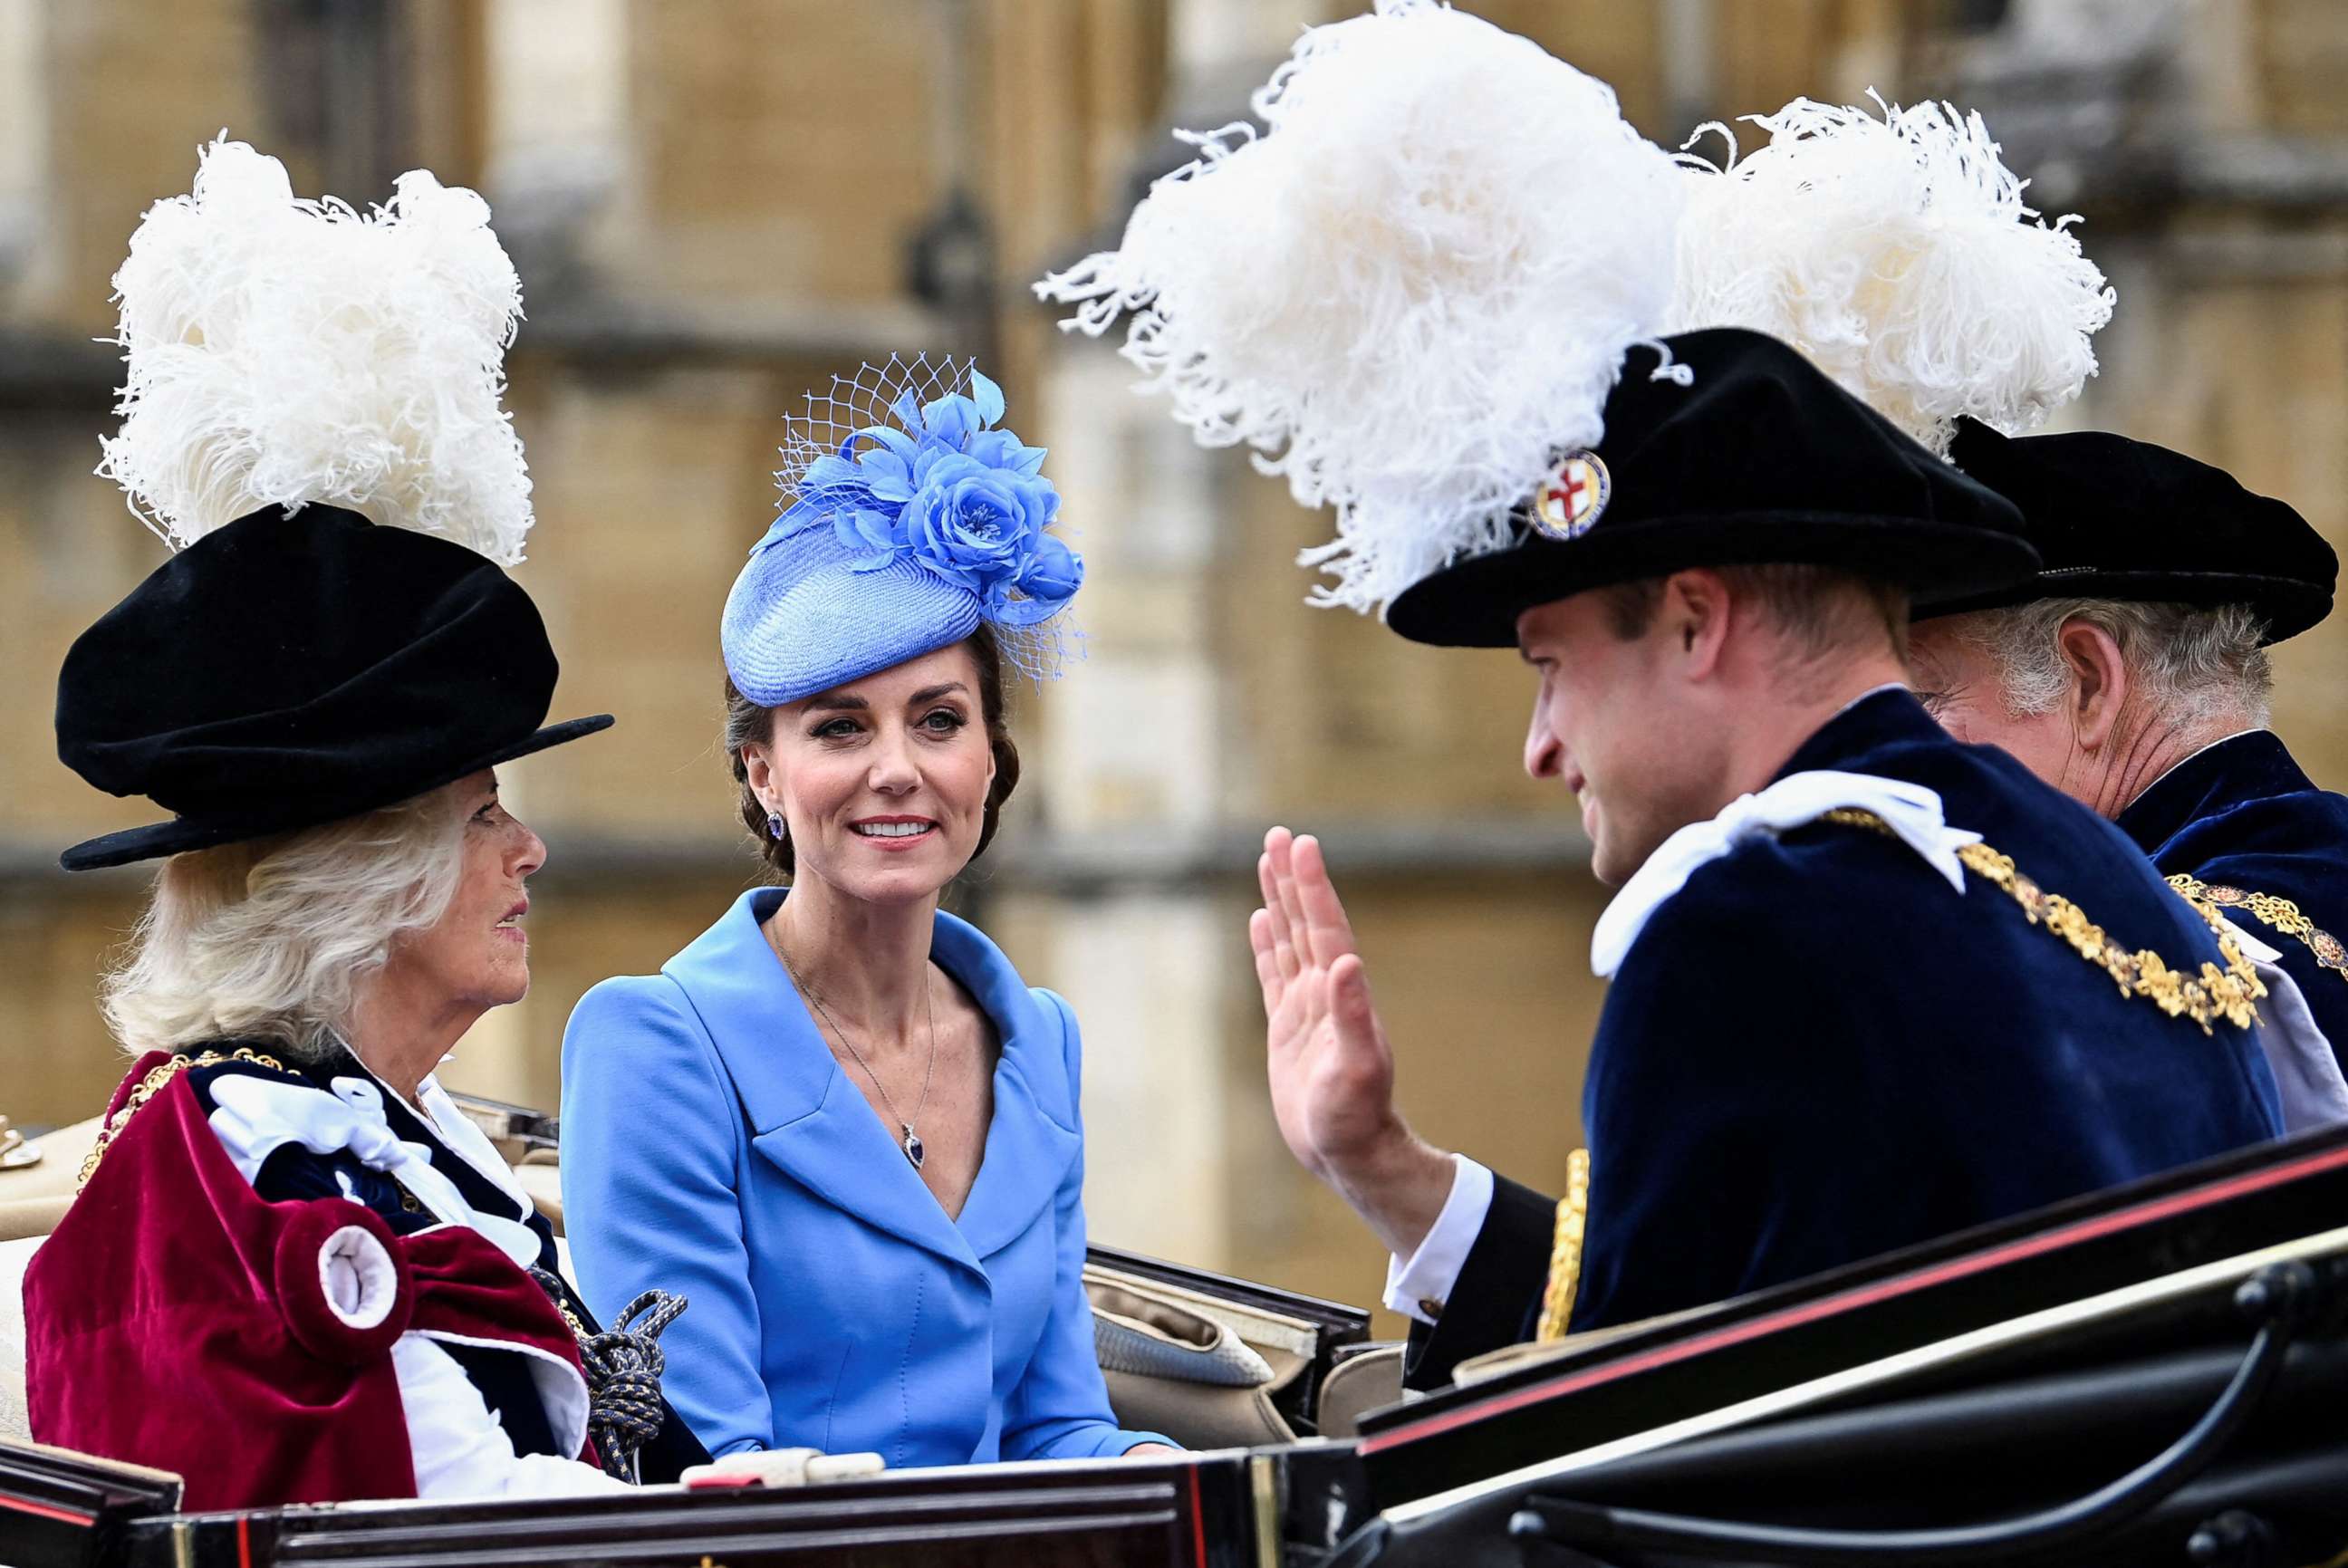 Prince William, Kate appear at Garter Day as Queen Elizabeth II